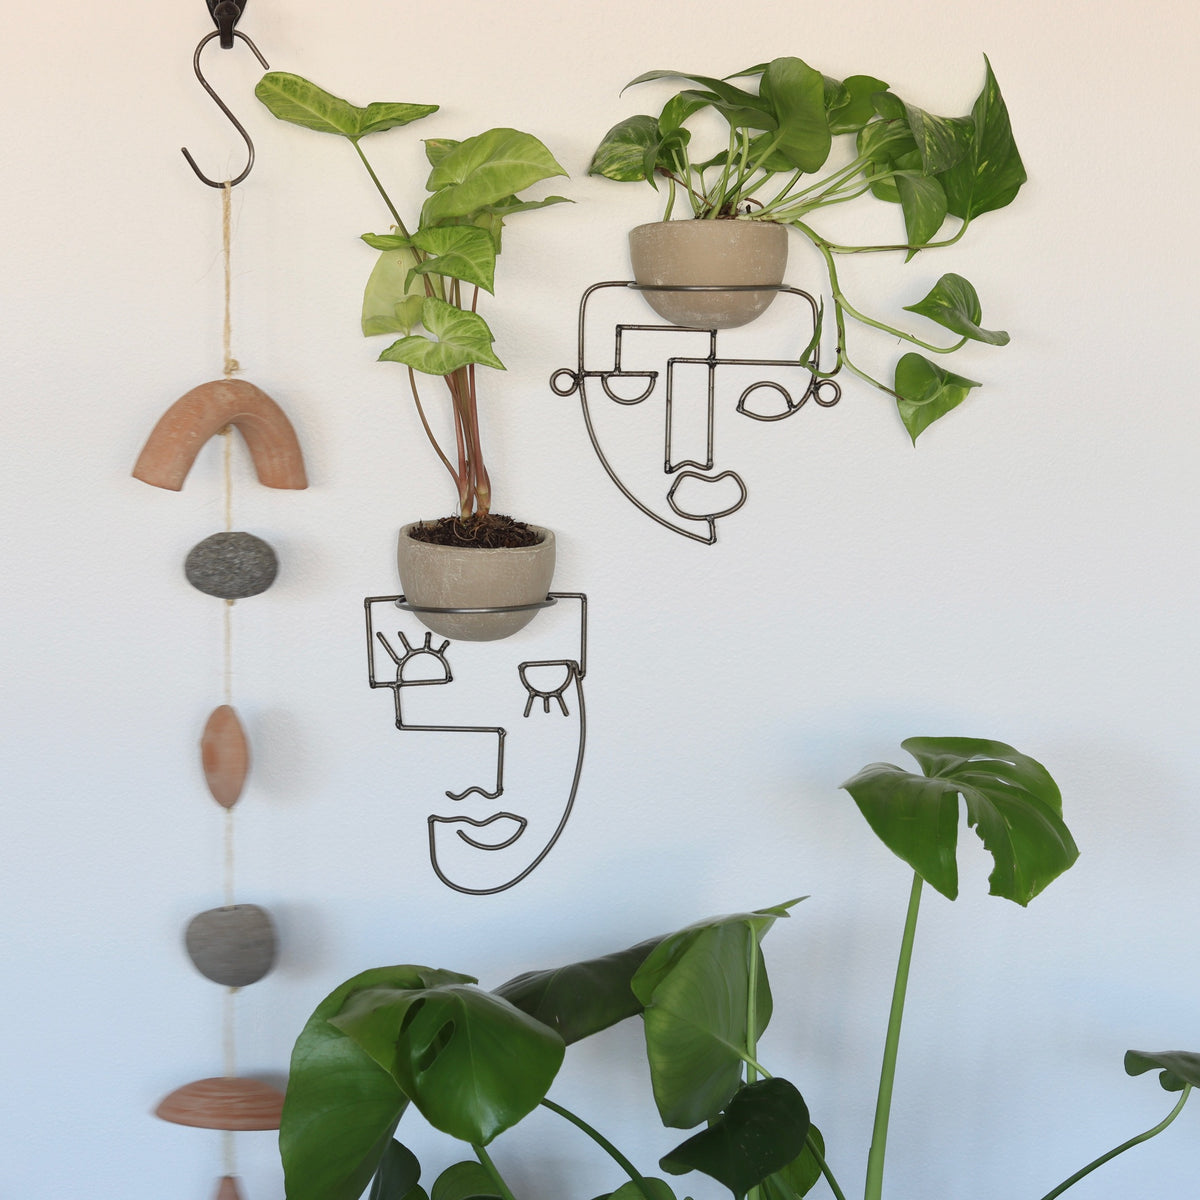 Best Face Forward Terracotta and Wire Wall Planters - Holistic Habitat 